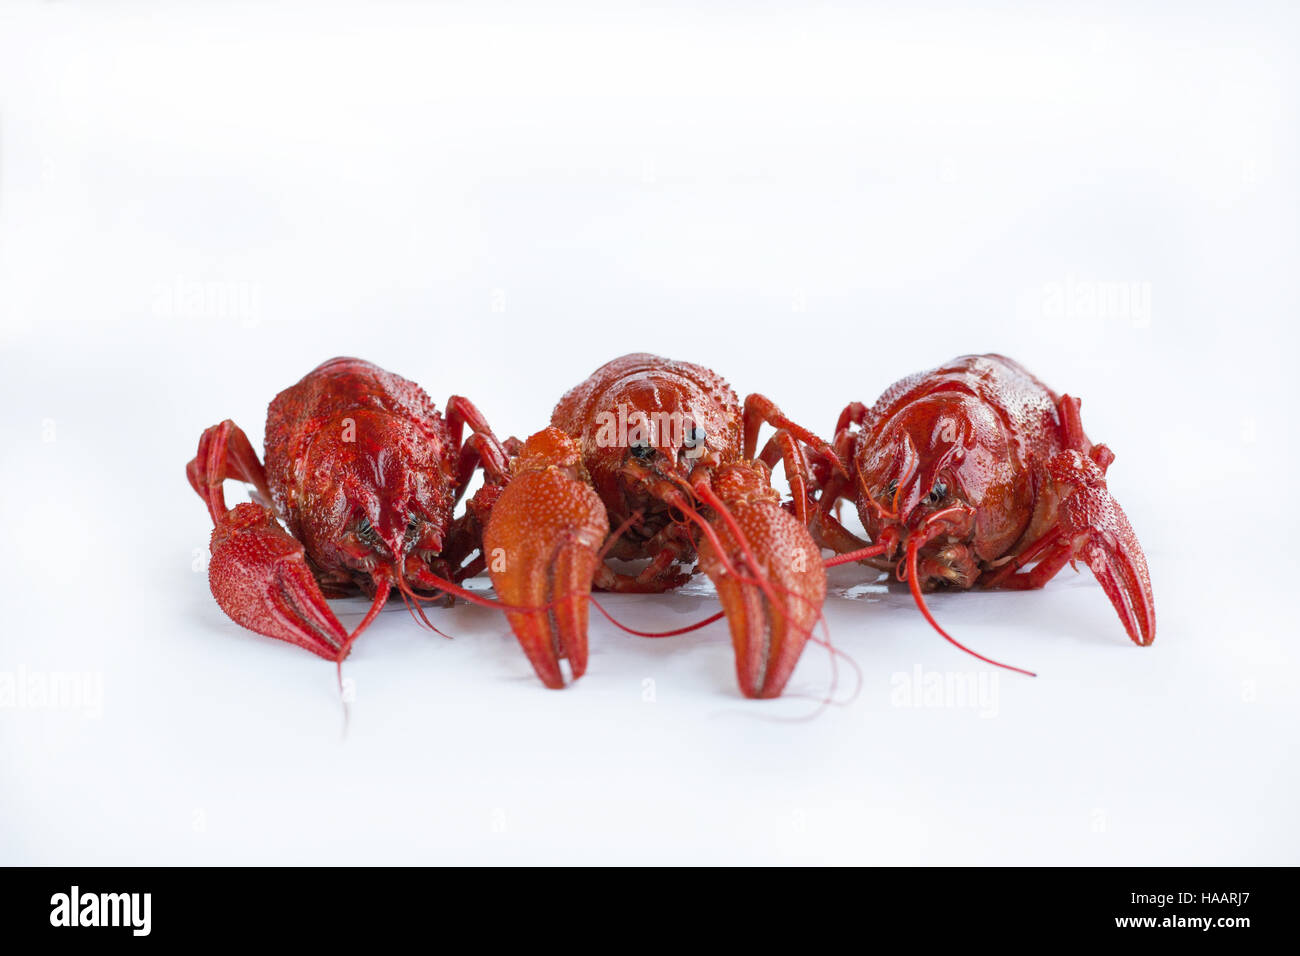 Three red boiled crayfishes with claws isolated on white background Stock Photo